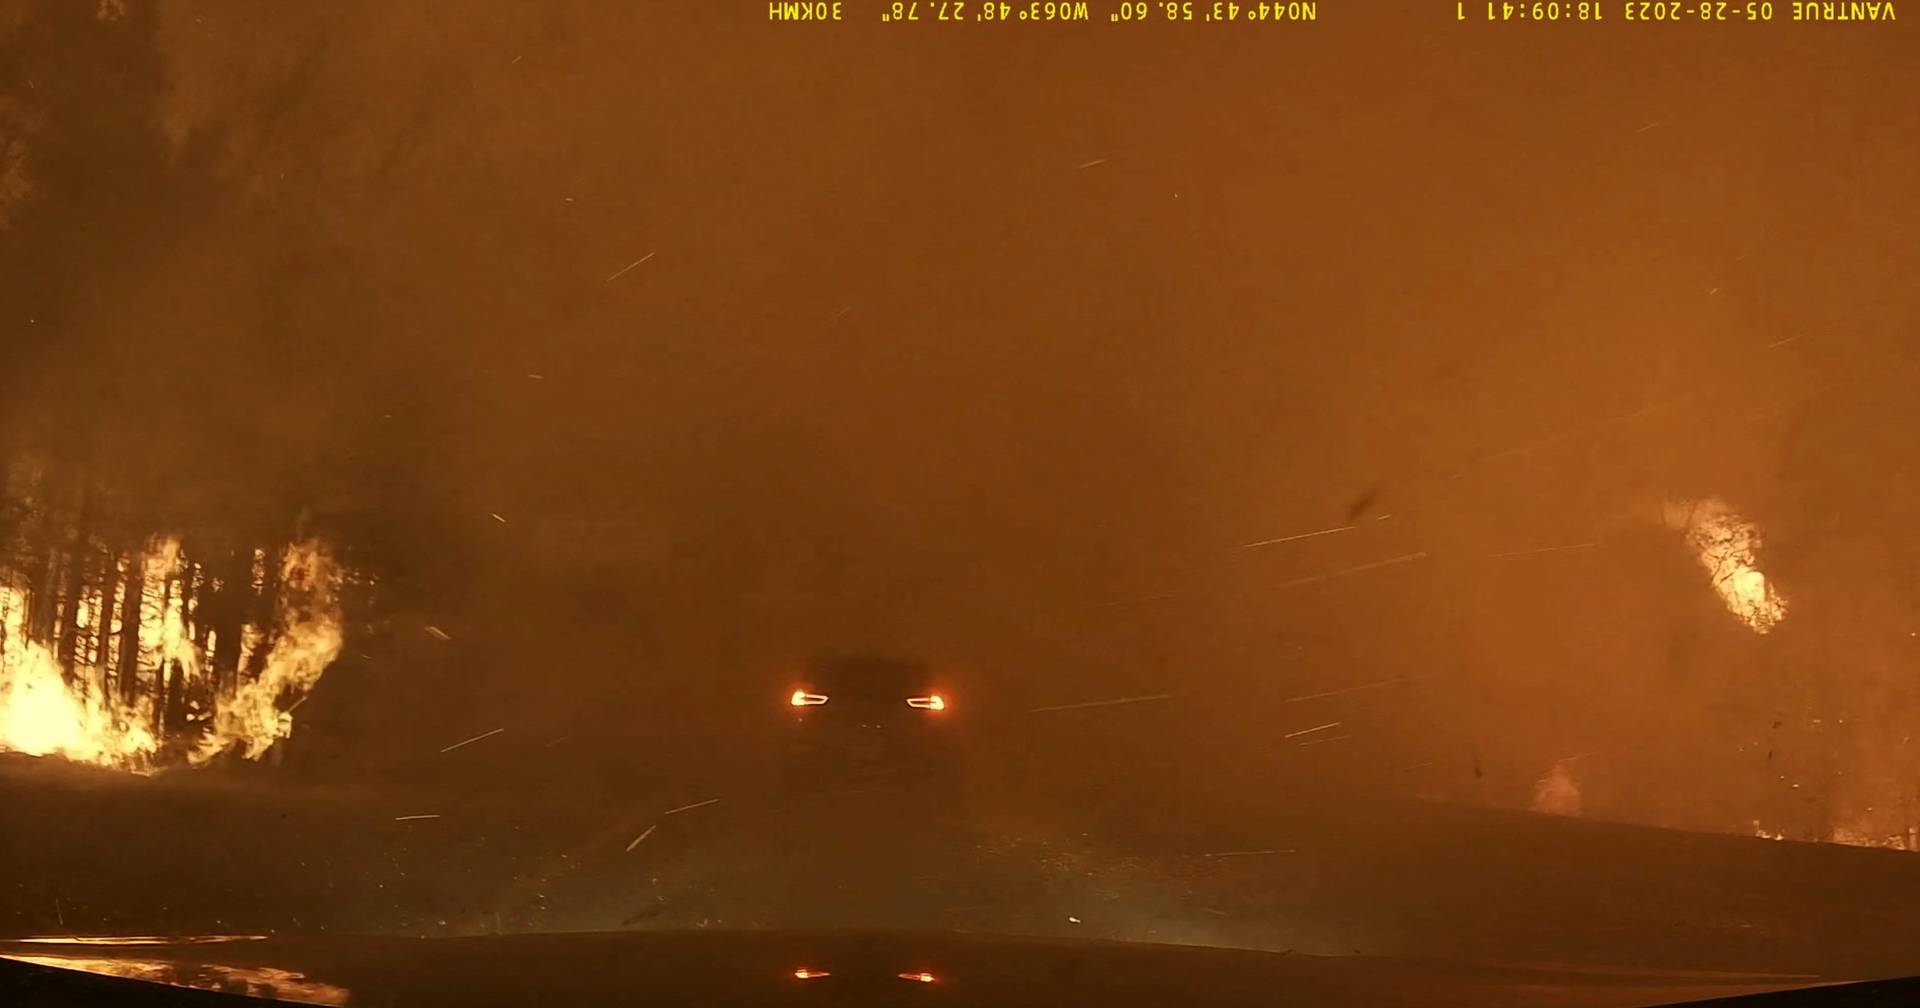 Fire Canada: Driver captures frightening video on road surrounded by flames